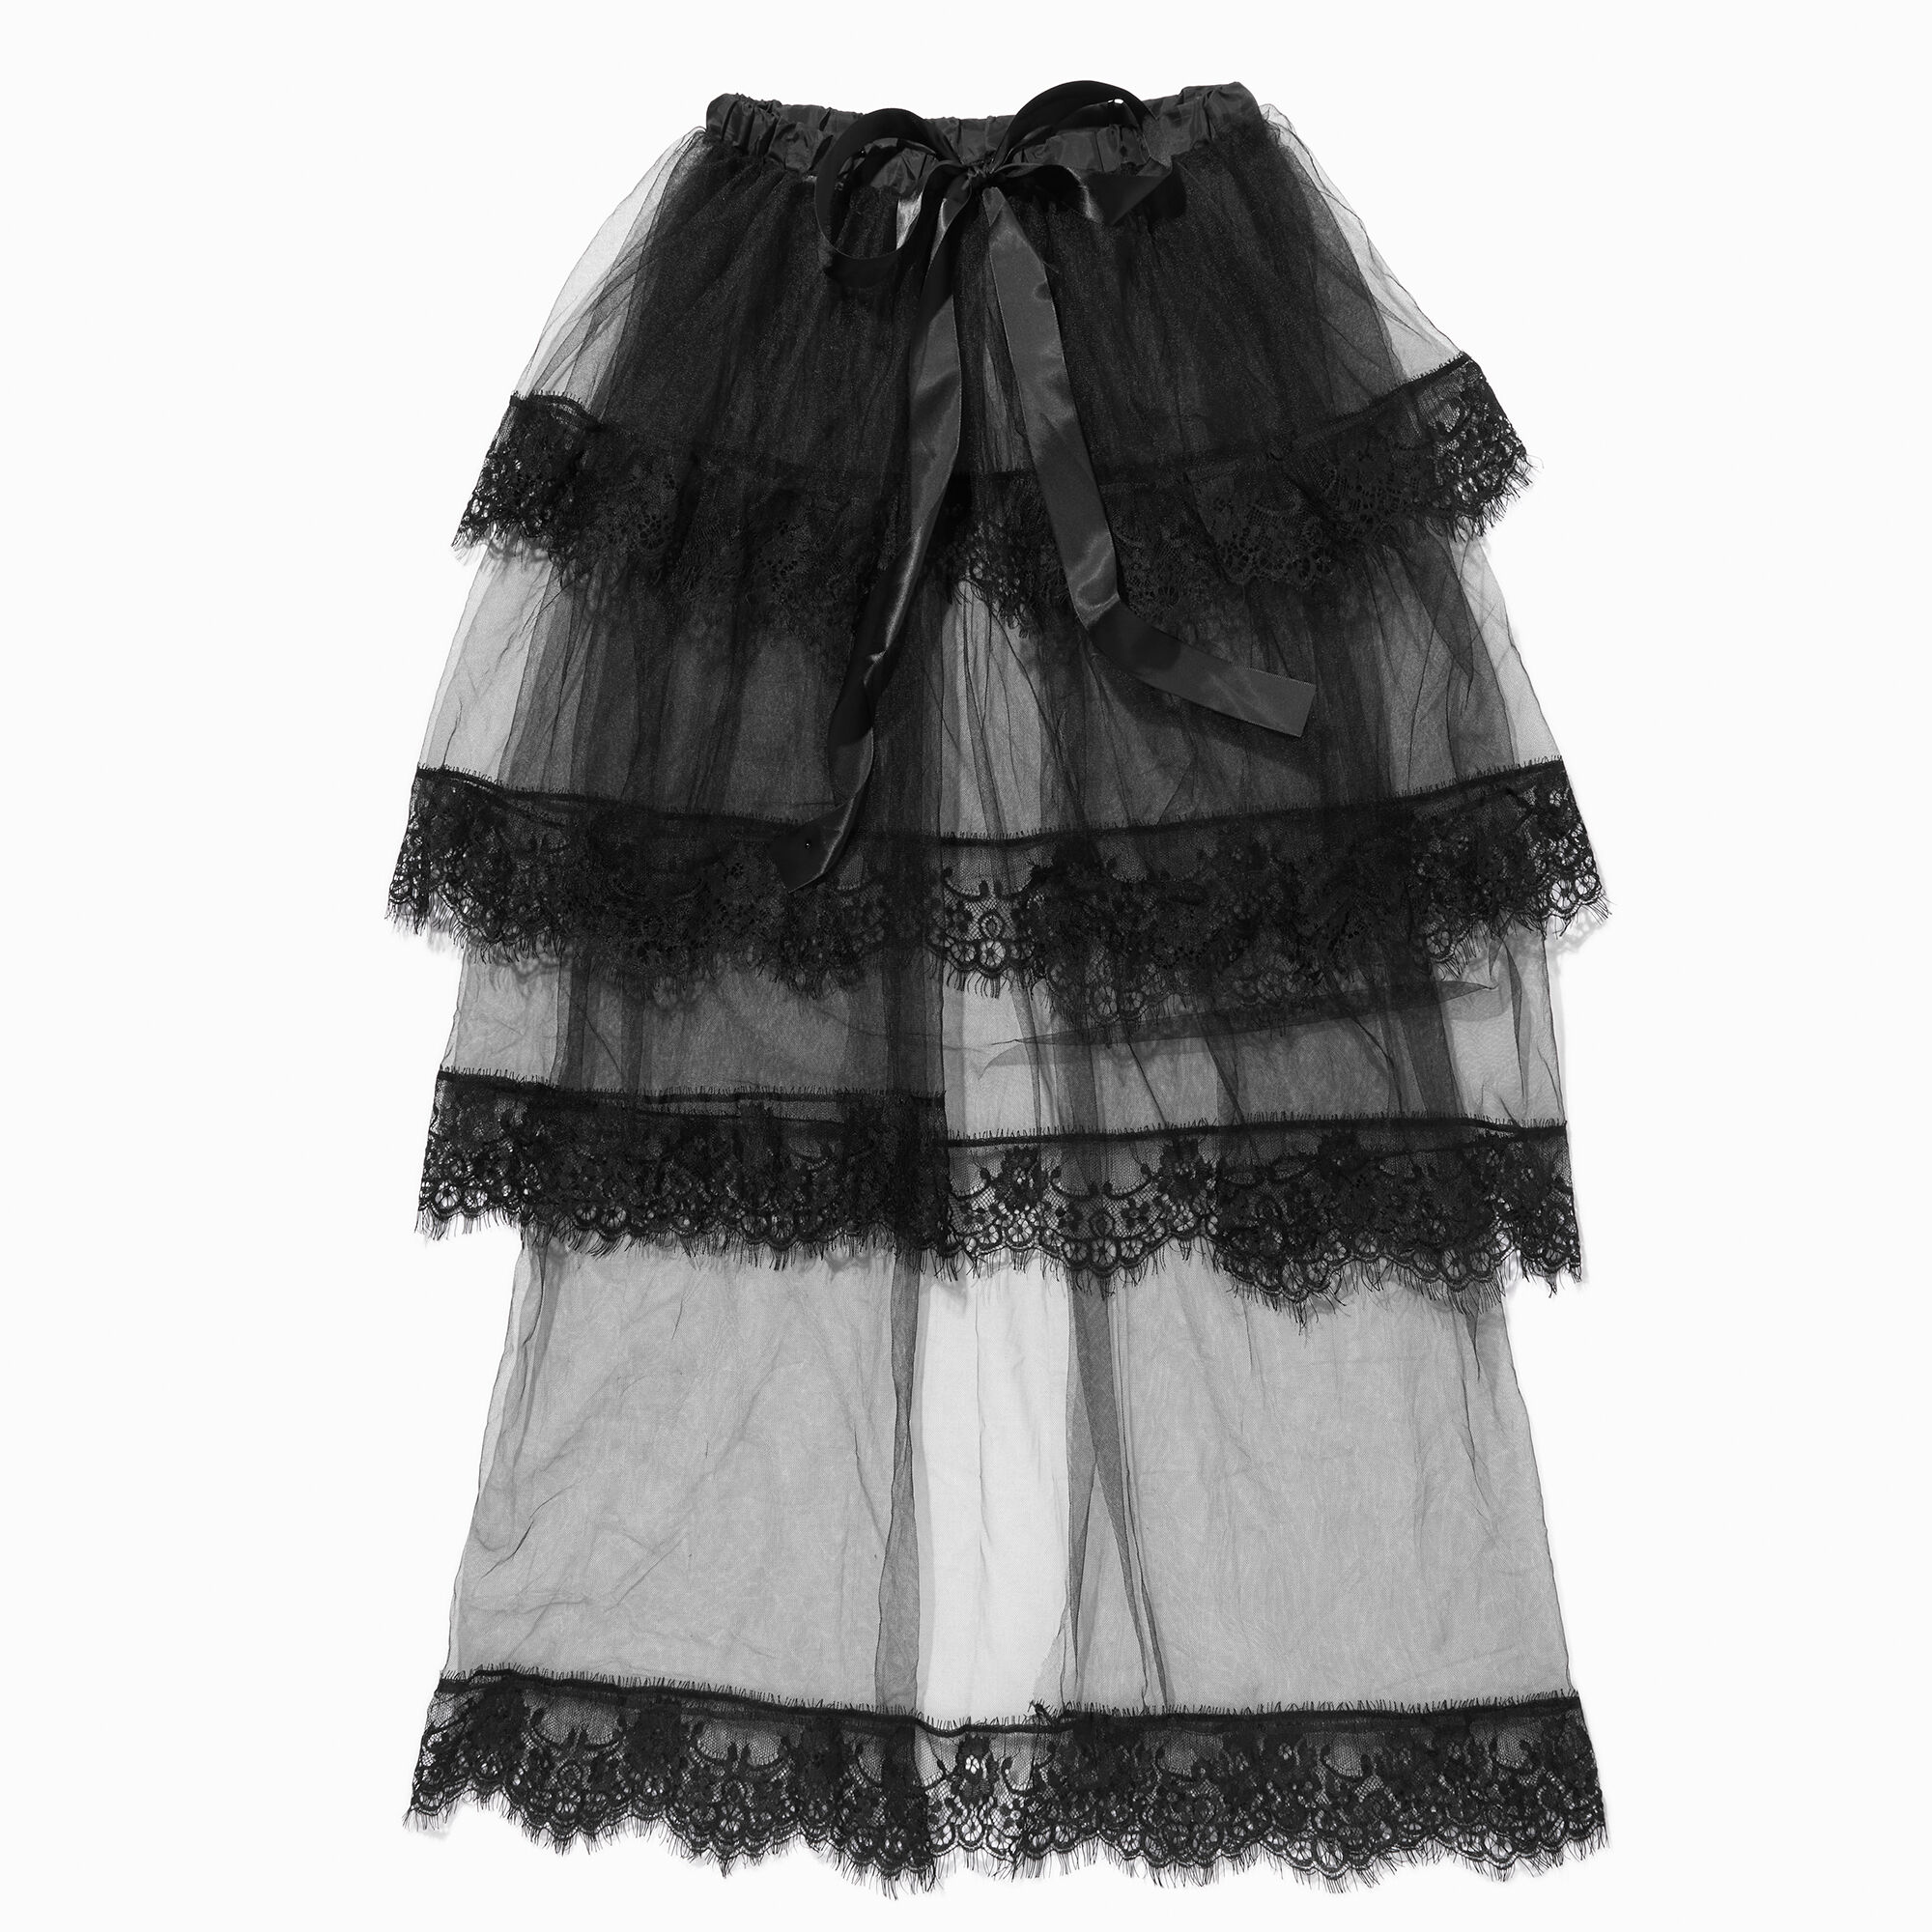 View Claires Tiered Lace Long Tutu Black information